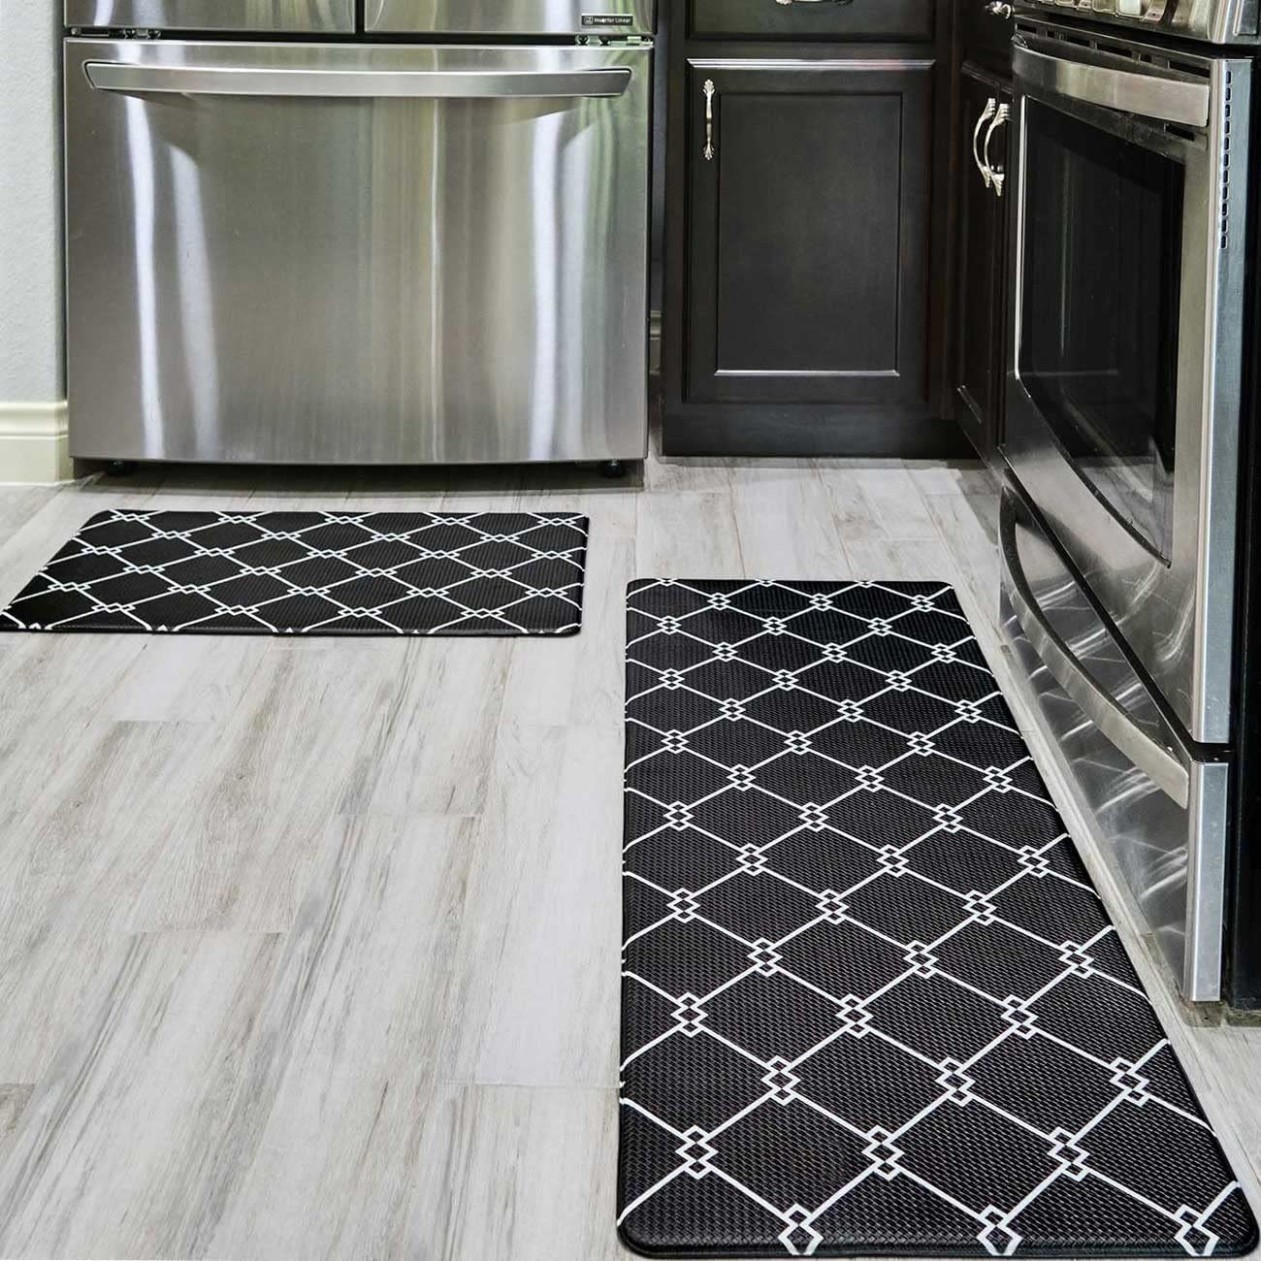 Sierra Concepts Kitchen Mat 5 Piece Rug Combo Set - Anti Fatigue Waterproof  Home Décor Cushioned Floor Mats for Standing near Sink, Bathroom,  - grey kitchen rugs